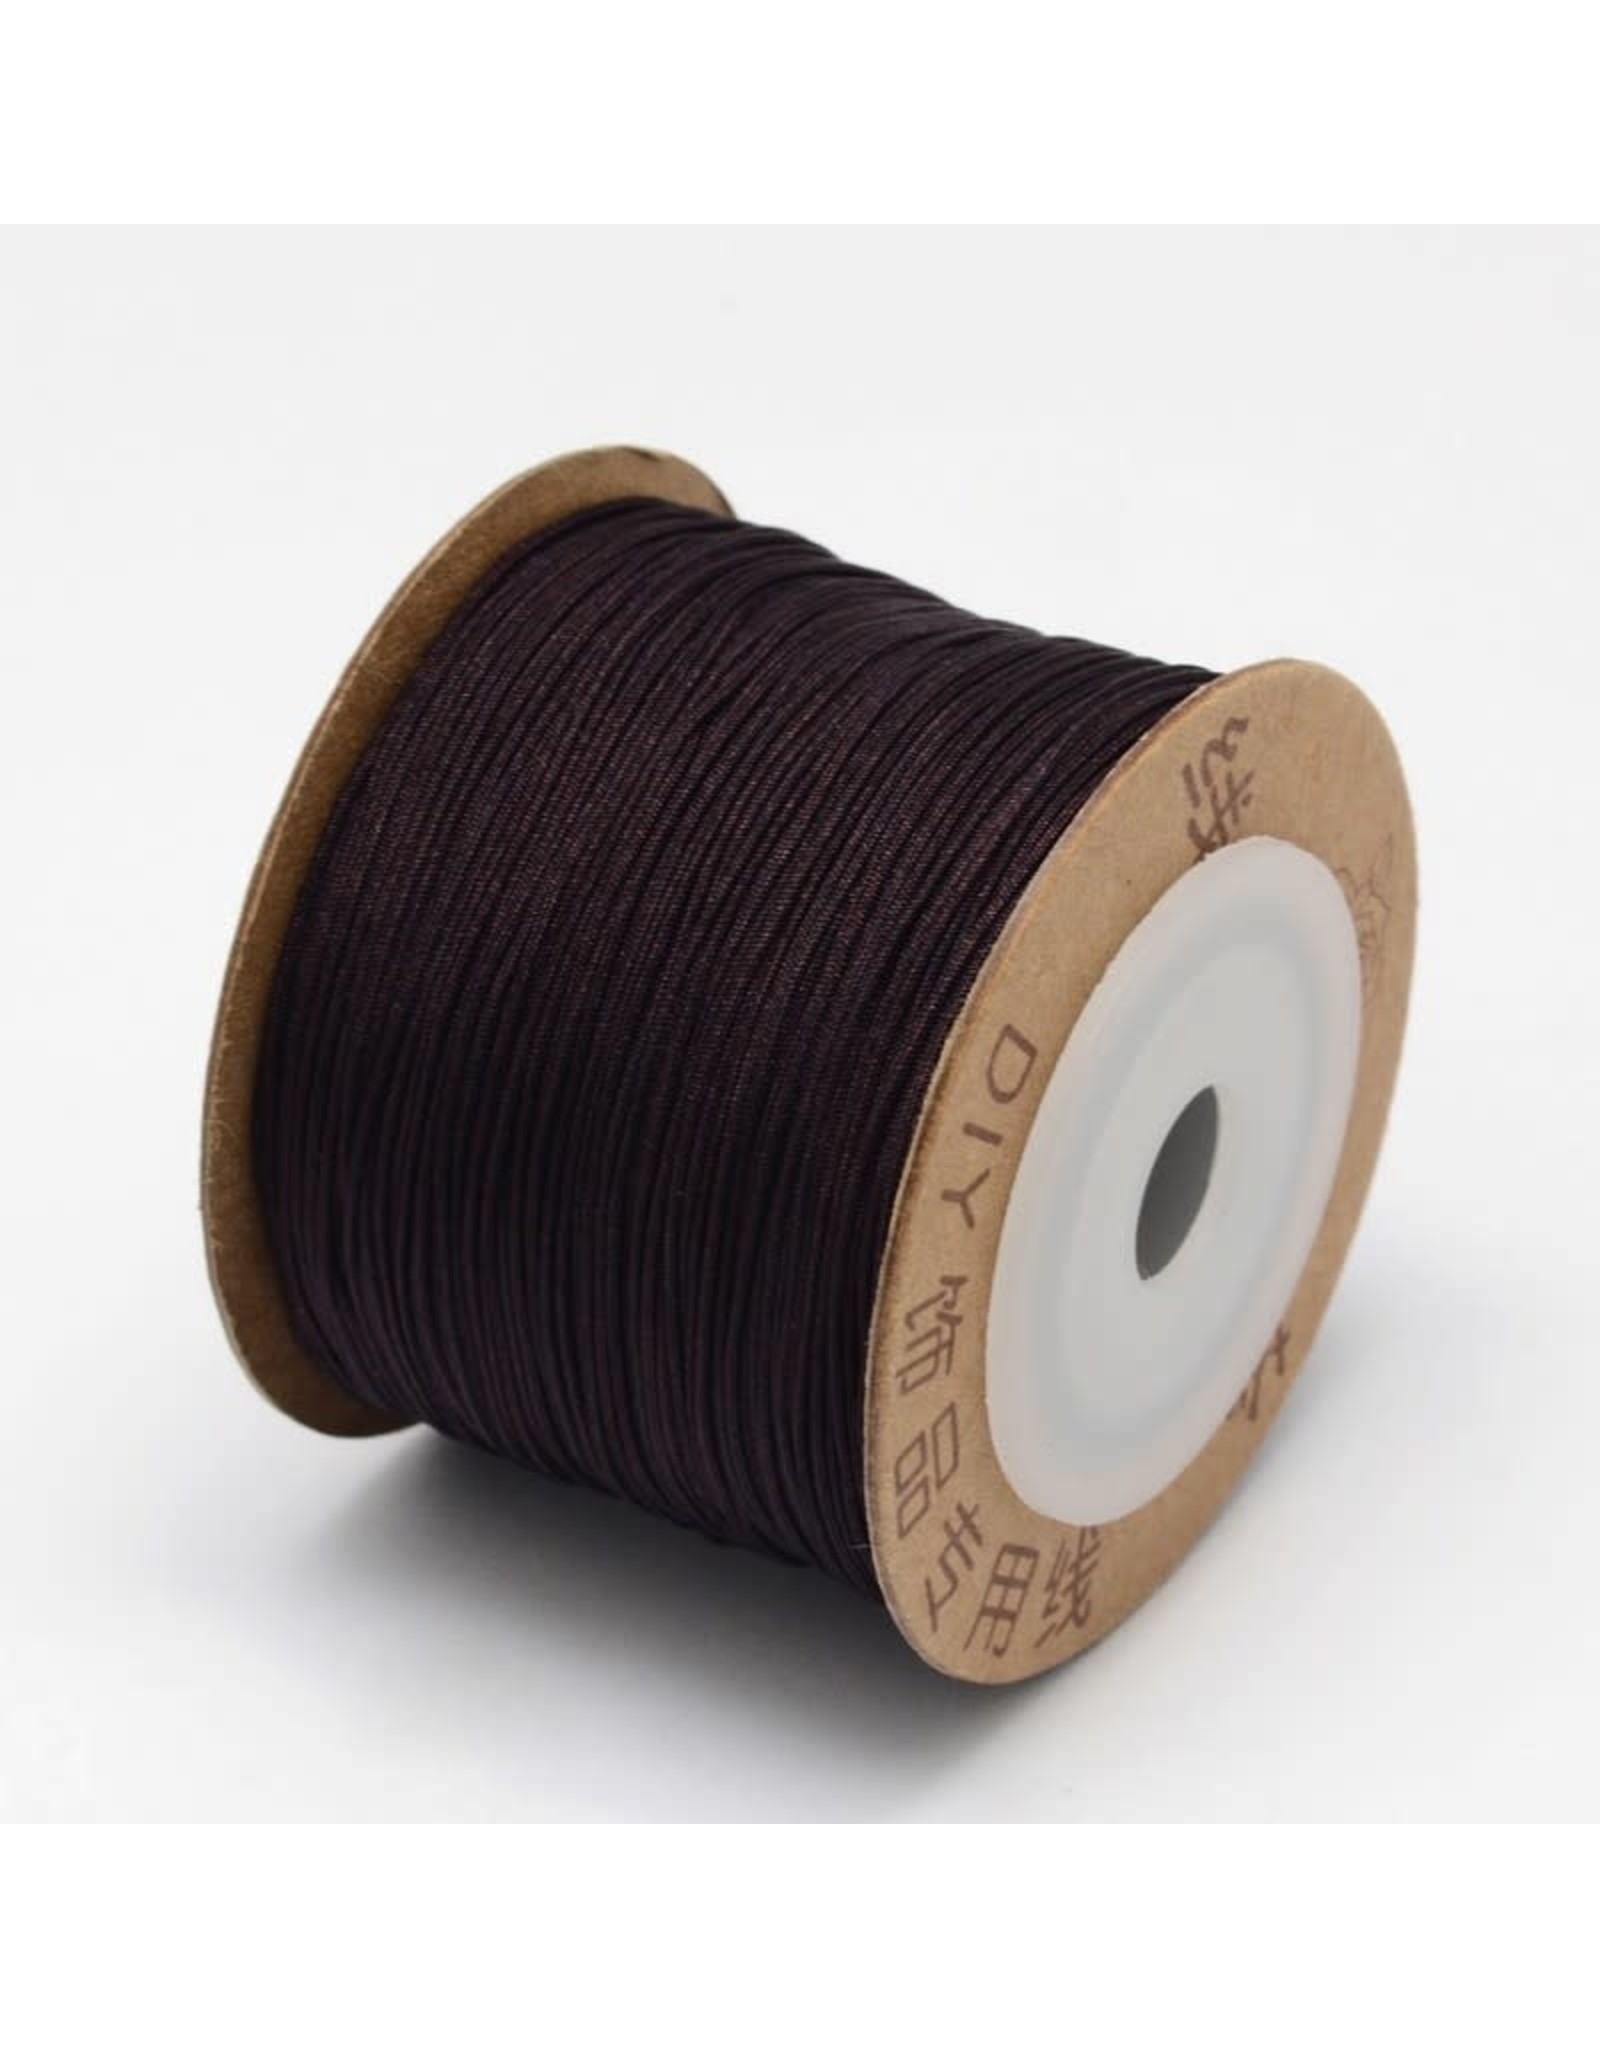 Chinese Knotting Cord .8mm Dark Coconut Brown x100m